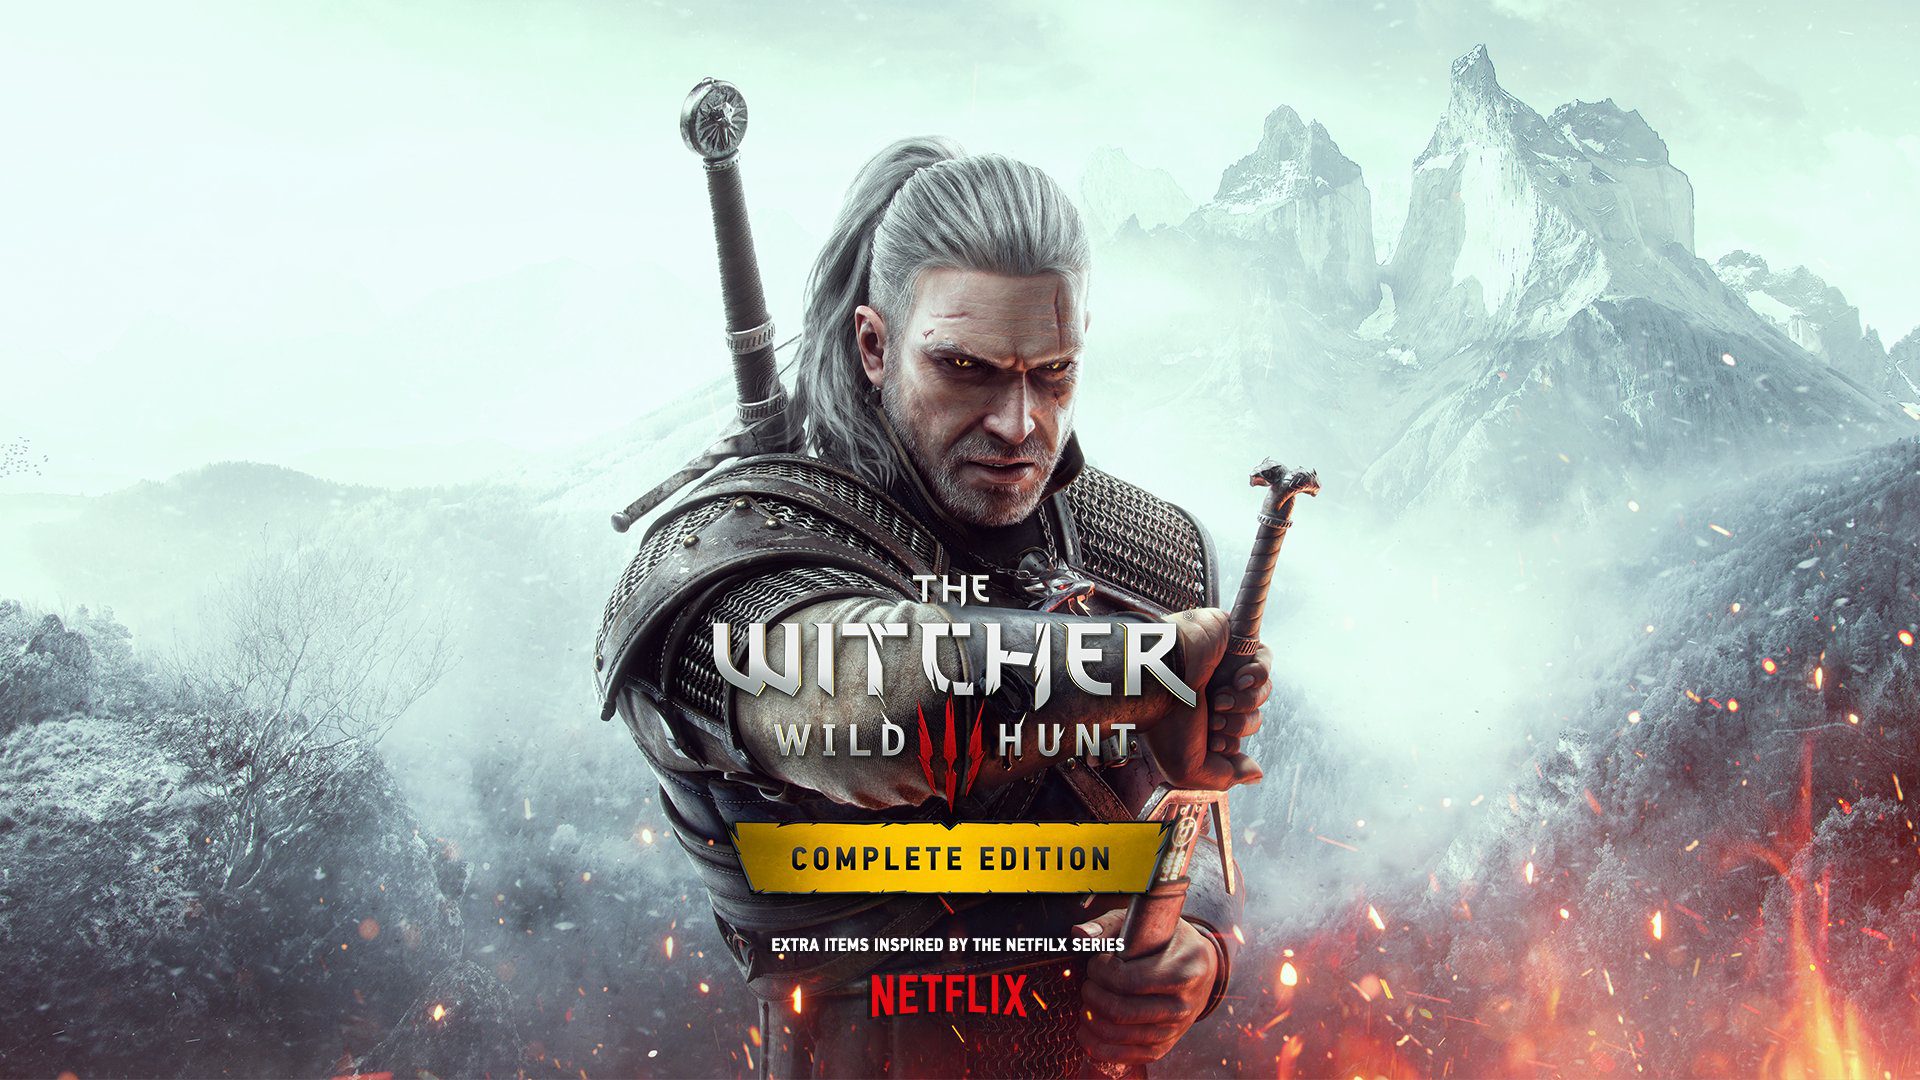 Prepare your hard drive, mega patch is coming for The Witcher 3 on all platforms